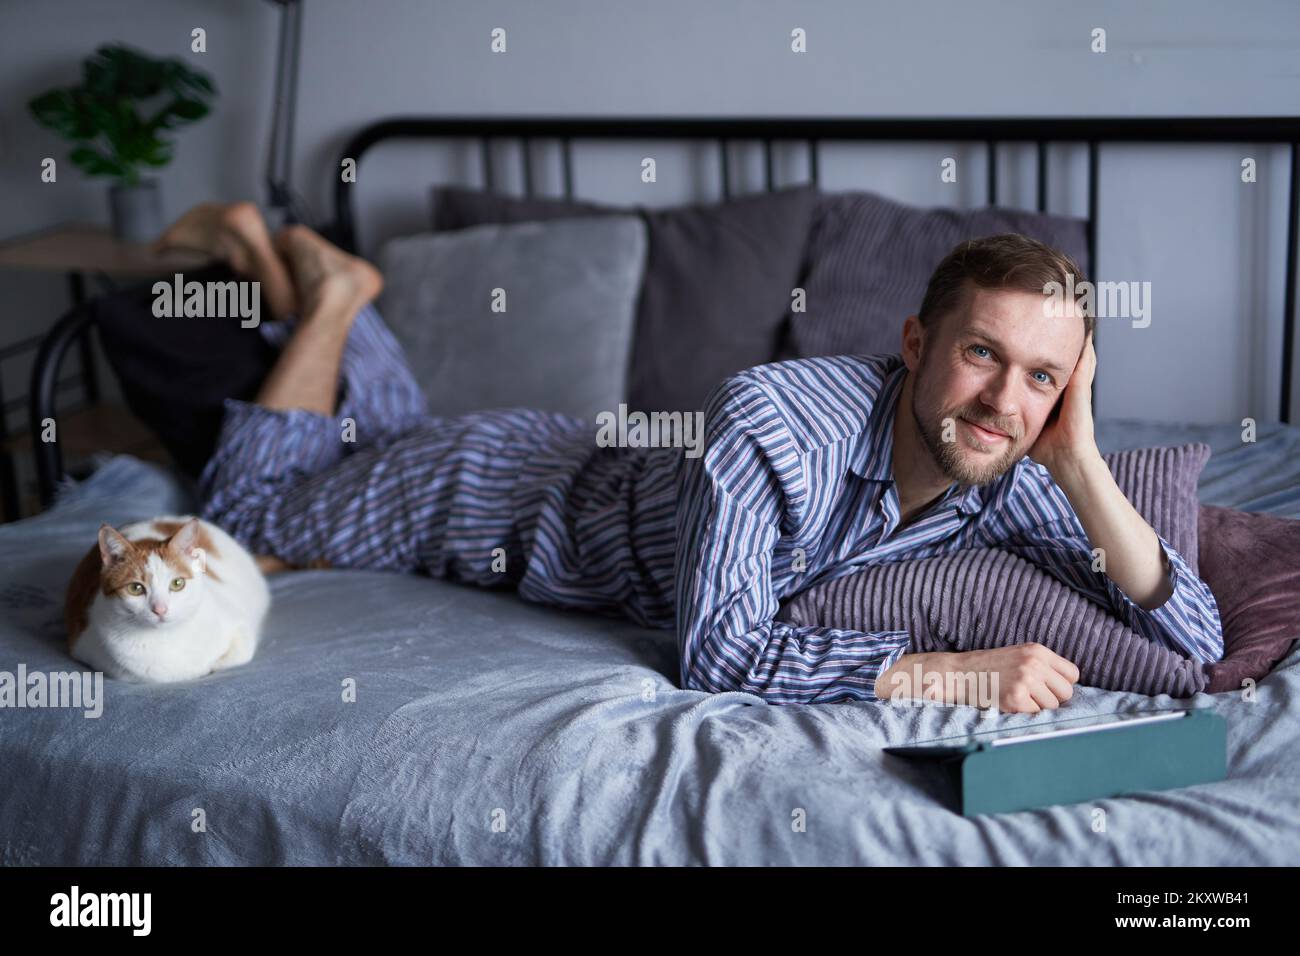 Bearded cheerful caucasian freelancer man in sleepwear lying on bed in the morning educating or making online shopping at home. Two tabby cats sitting nearby. High quality image Stock Photo